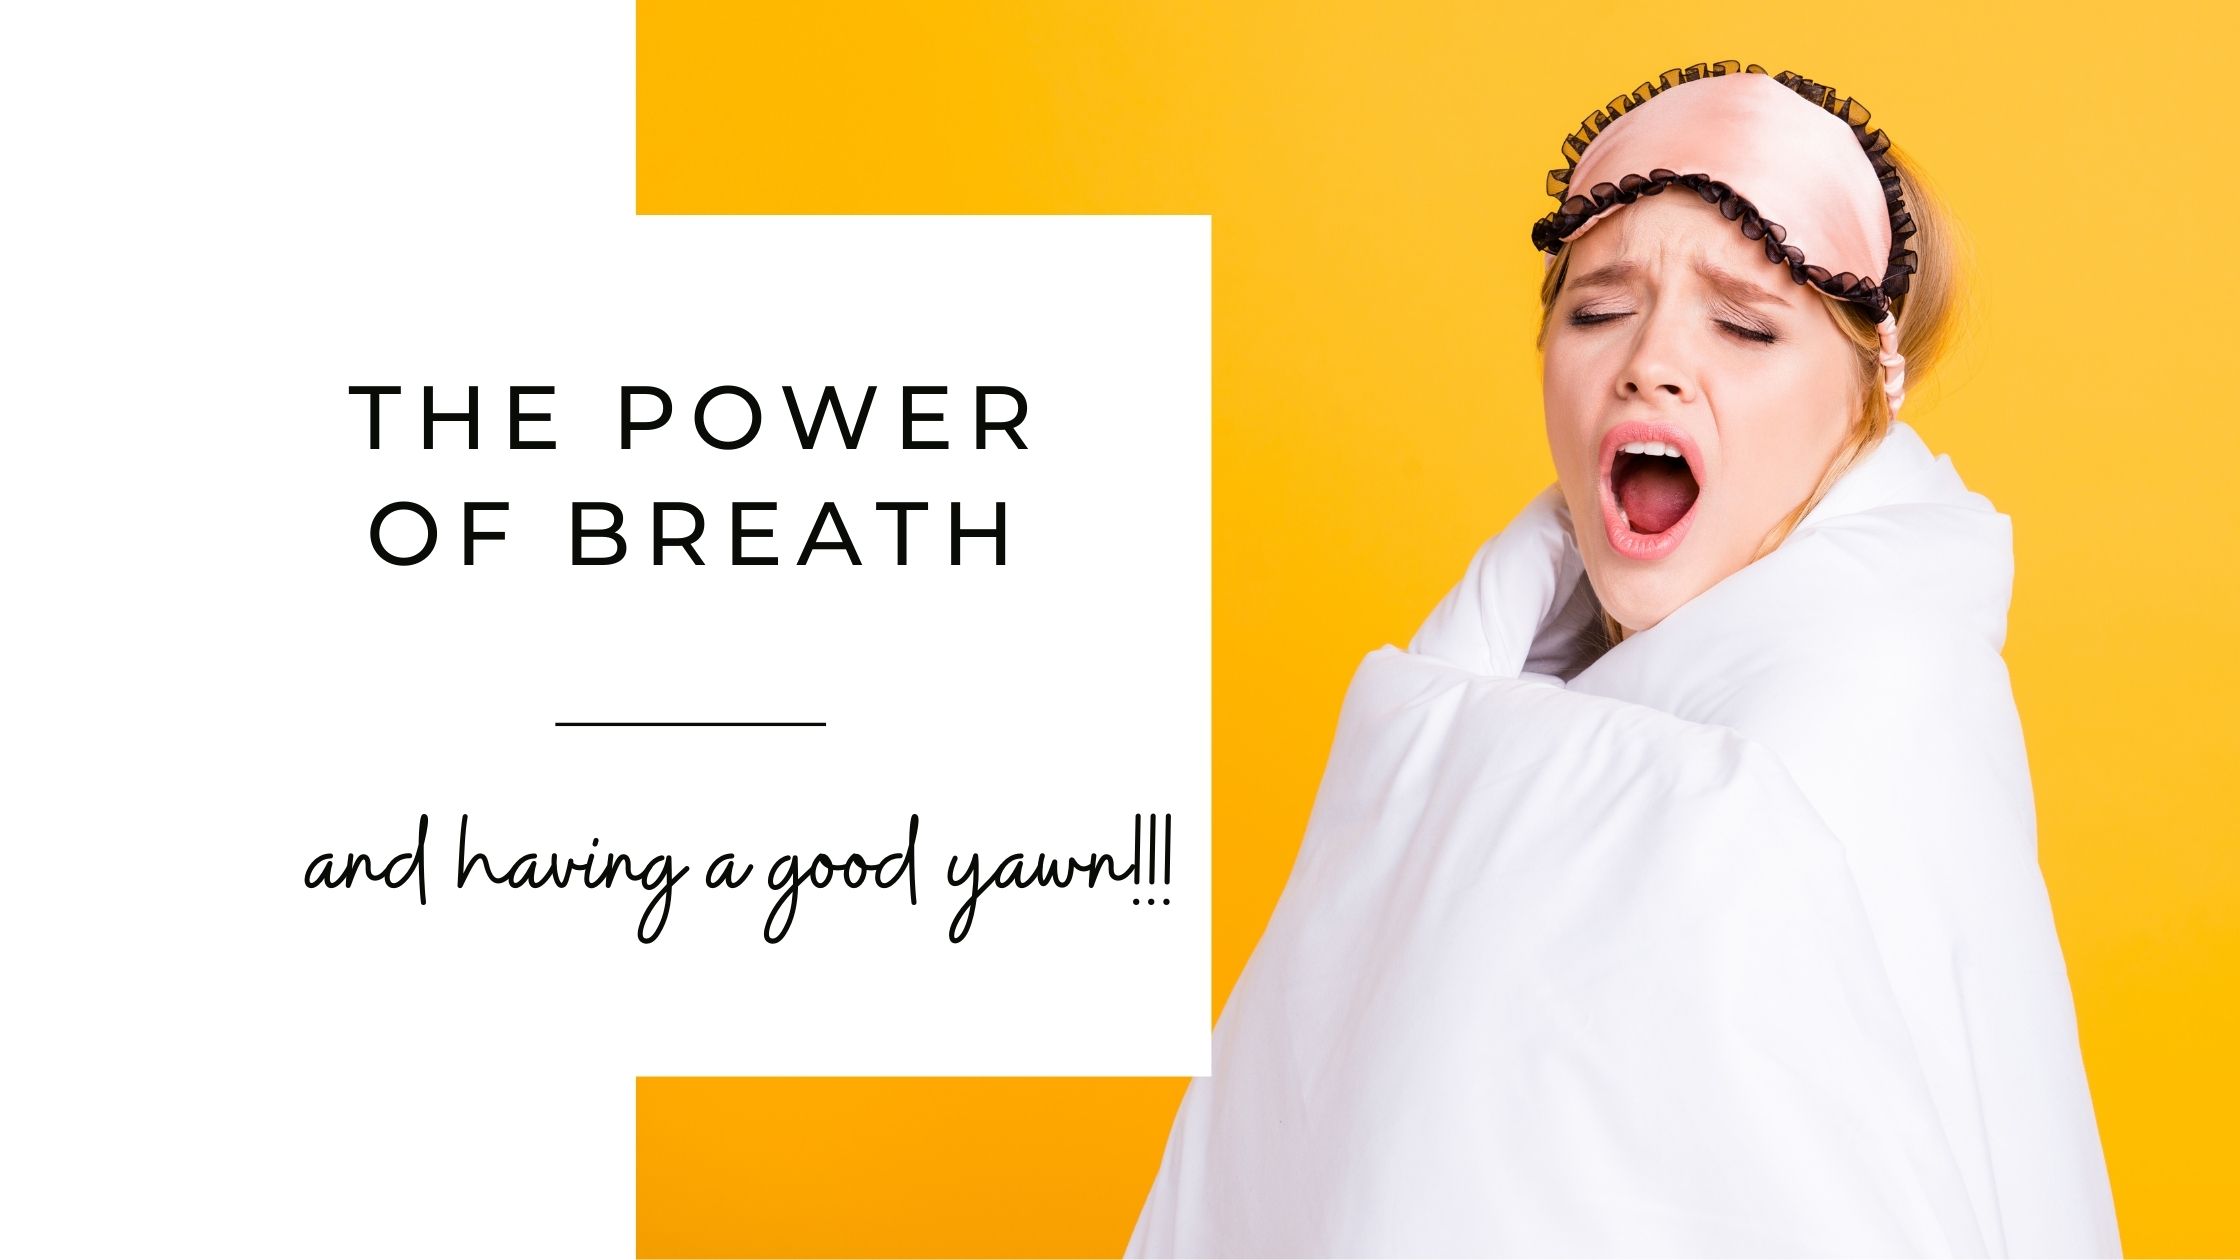 The power of breath